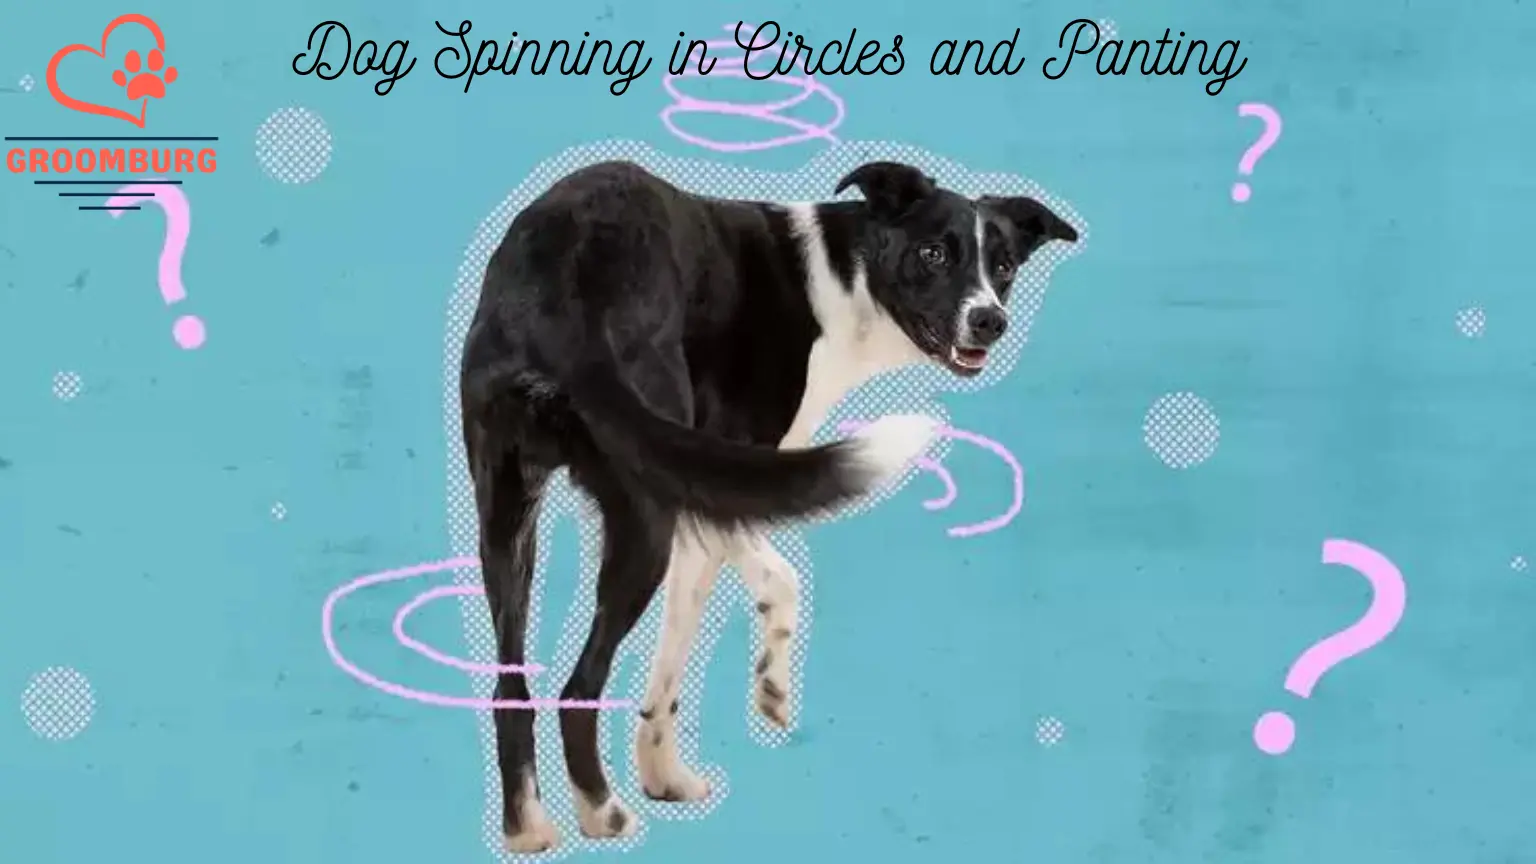 All of Sudden My Dog Spinning in Circles and Panting – Is It a Normal Behavior?